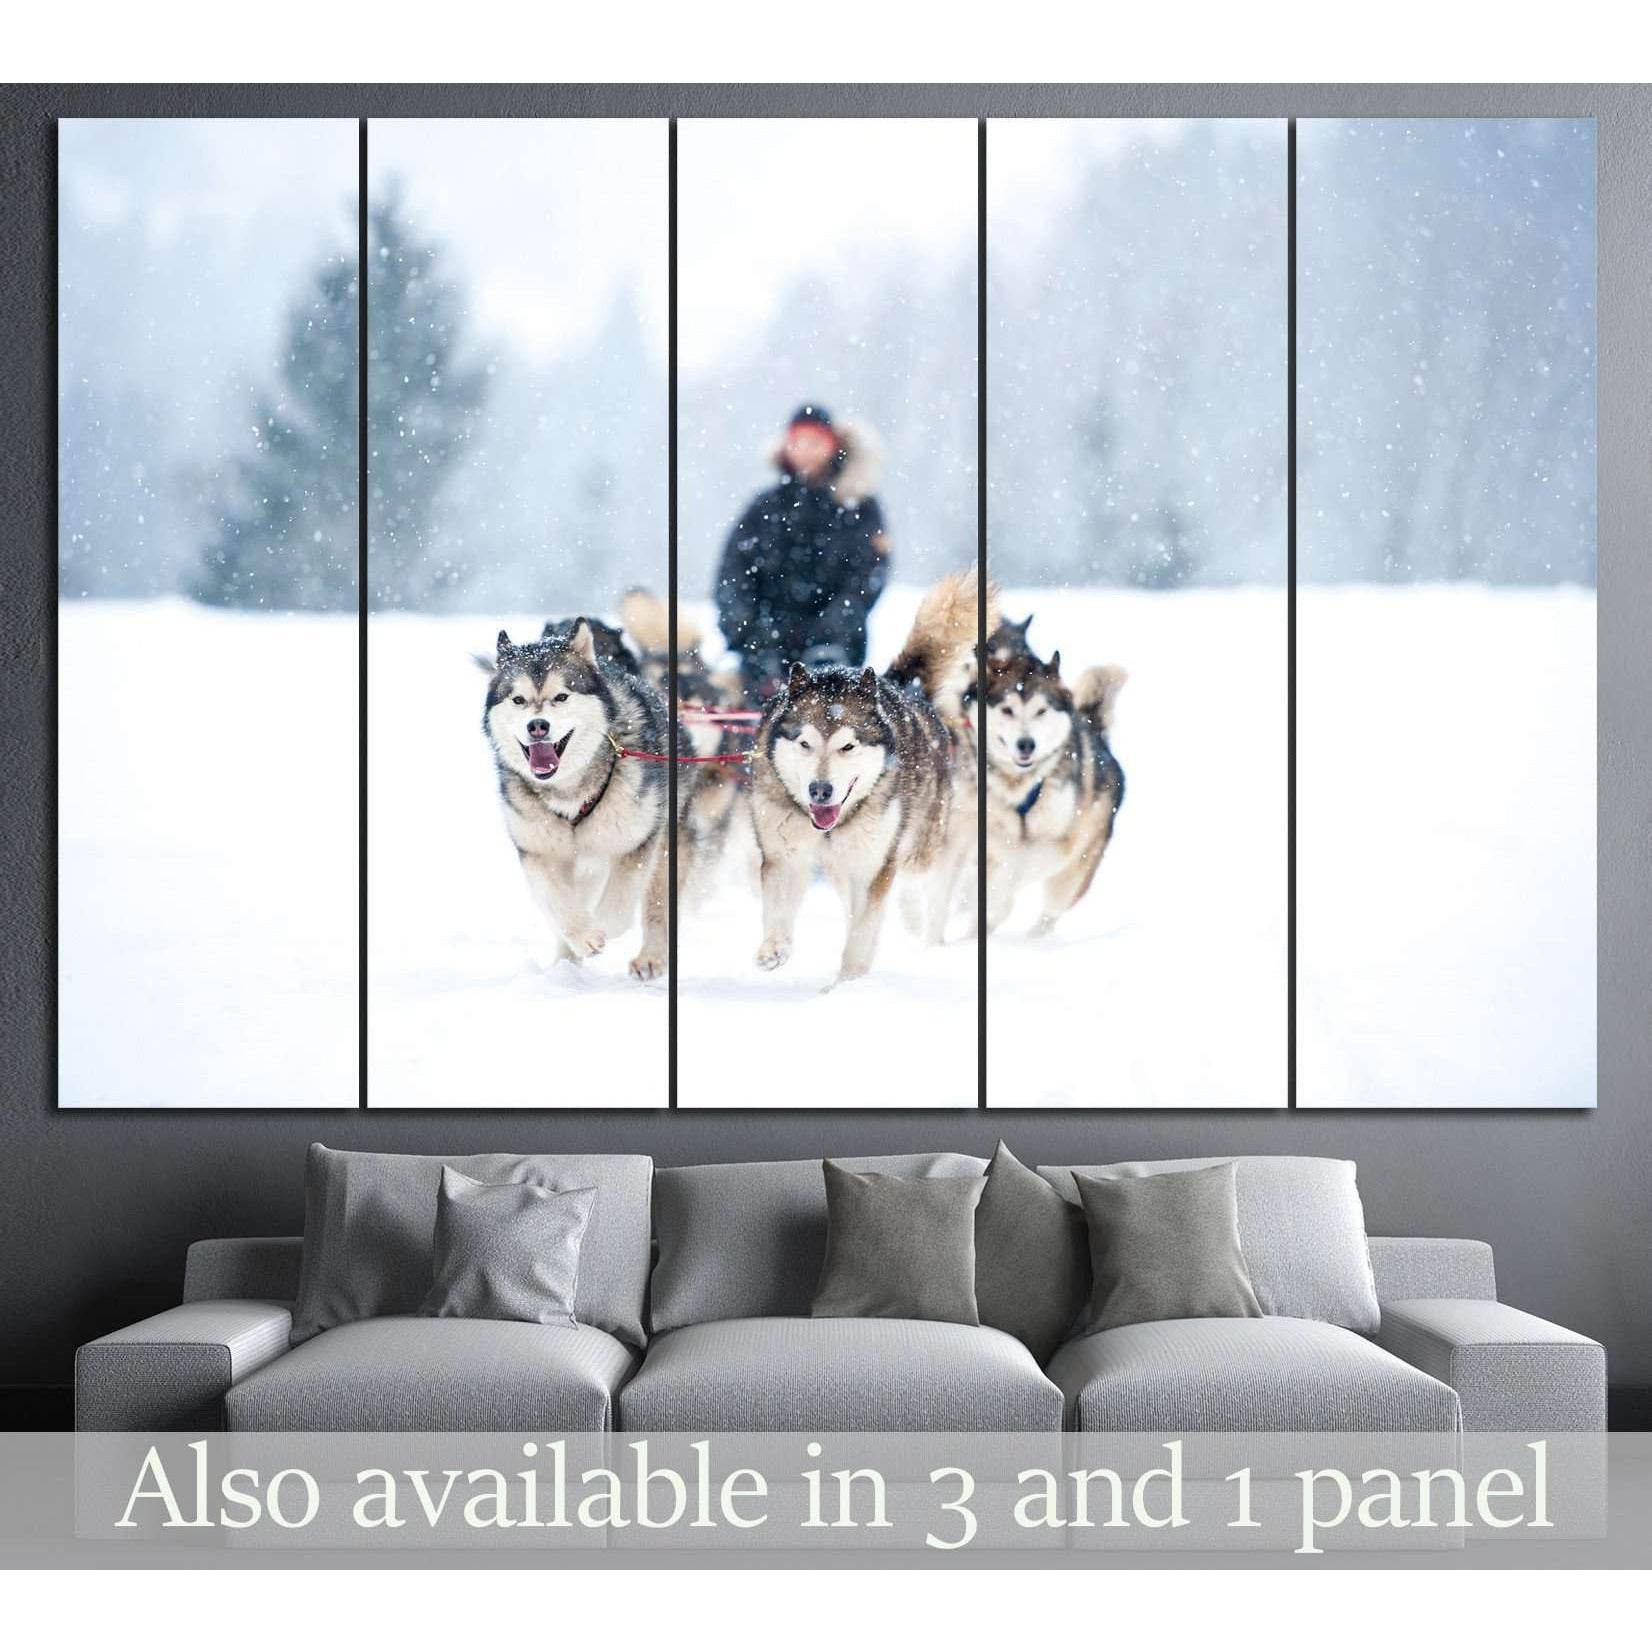 Dogs team and Snow №7 Ready to Hang Canvas Print